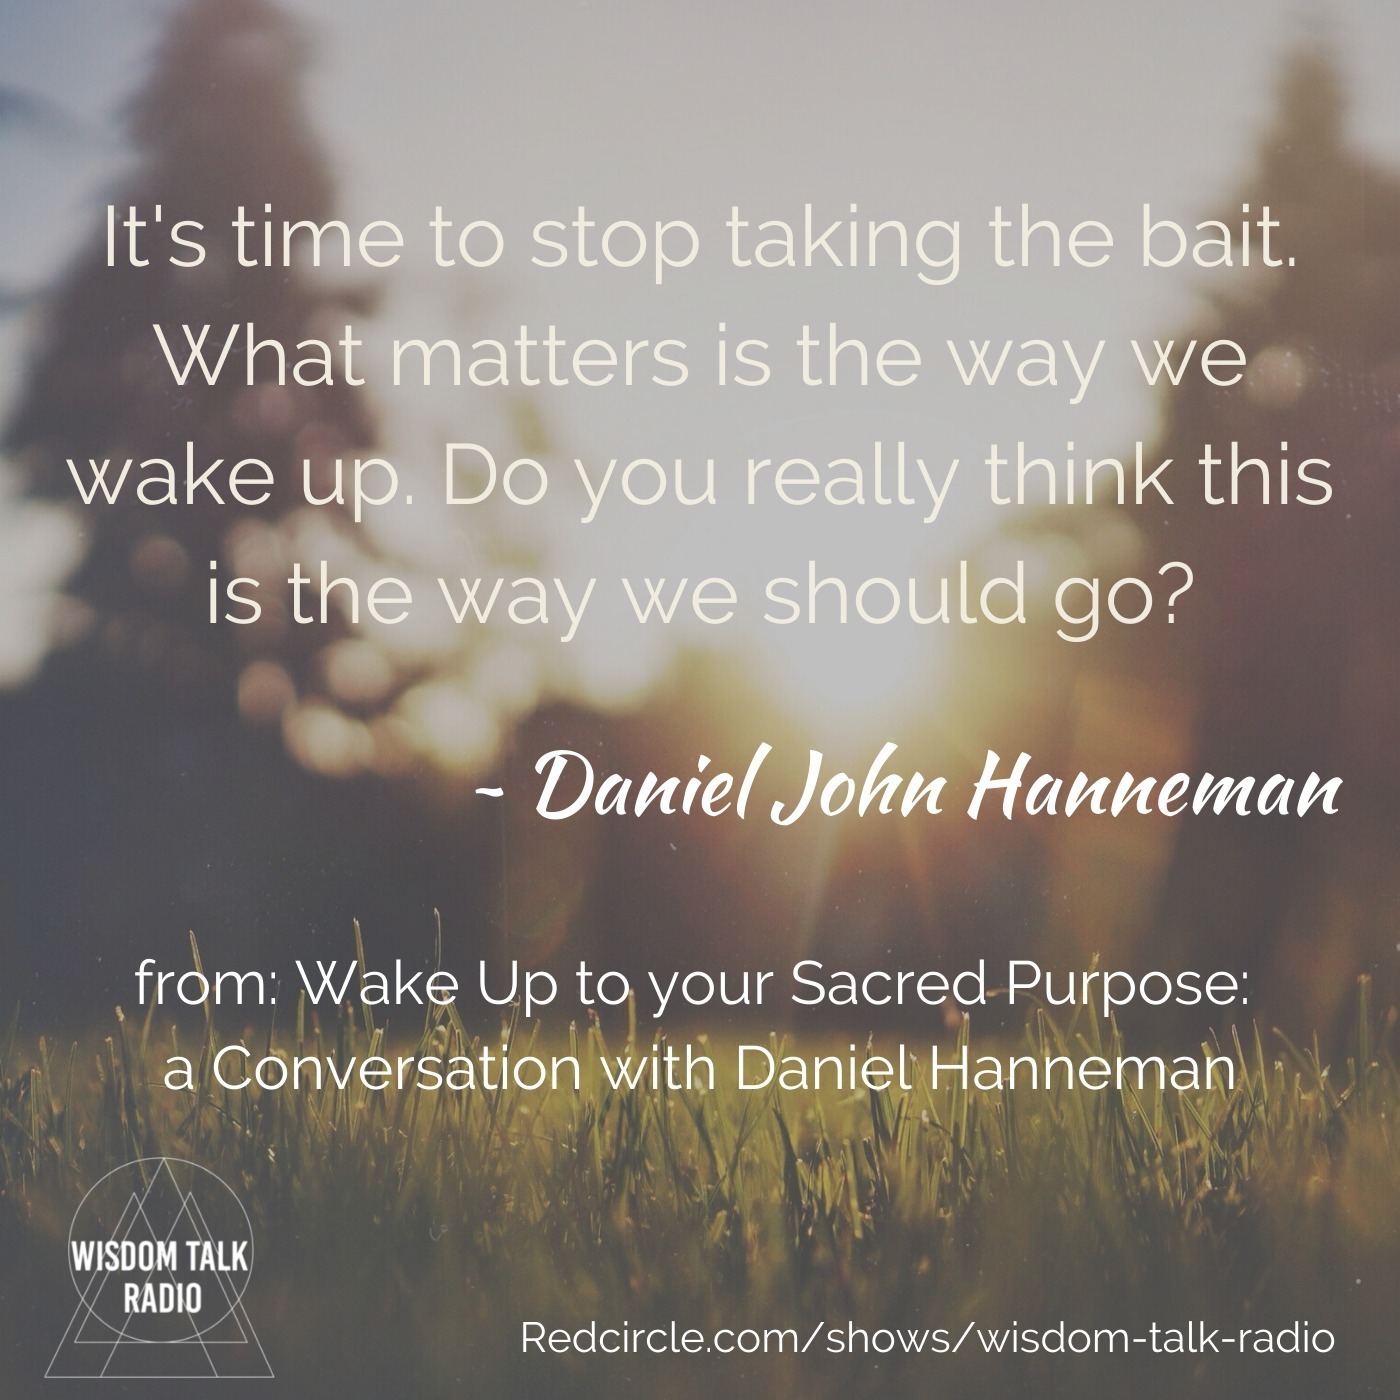 Wake Up to Your Sacred Purpose: a conversation with Daniel Hanneman